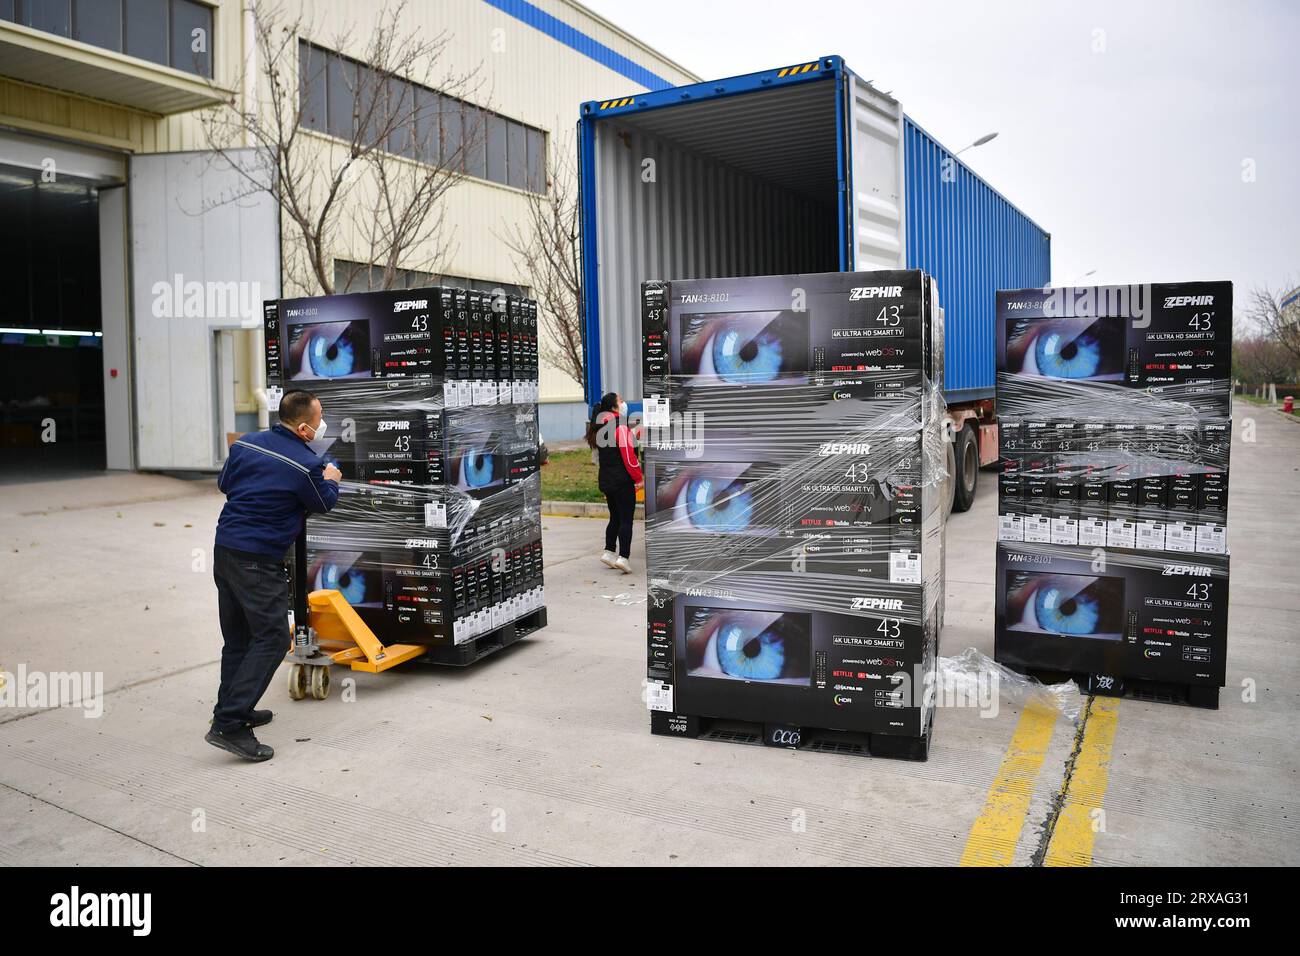 Xi'an, China's Shaanxi Province. 17th Mar, 2022. Workers load products at a company producing display devices near Xi'an International Port in Xi'an, northwest China's Shaanxi Province, March 17, 2022. The Chang'an China-Europe freight train service was launched in 2013, when China proposed the Belt and Road Initiative. In the past ten years, Xi'an International Port, the starting station of the Chang'an China-Europe freight trains, has been developed from a small cargo station to an international logistic hub. Credit: Shao Rui/Xinhua/Alamy Live News Stock Photo